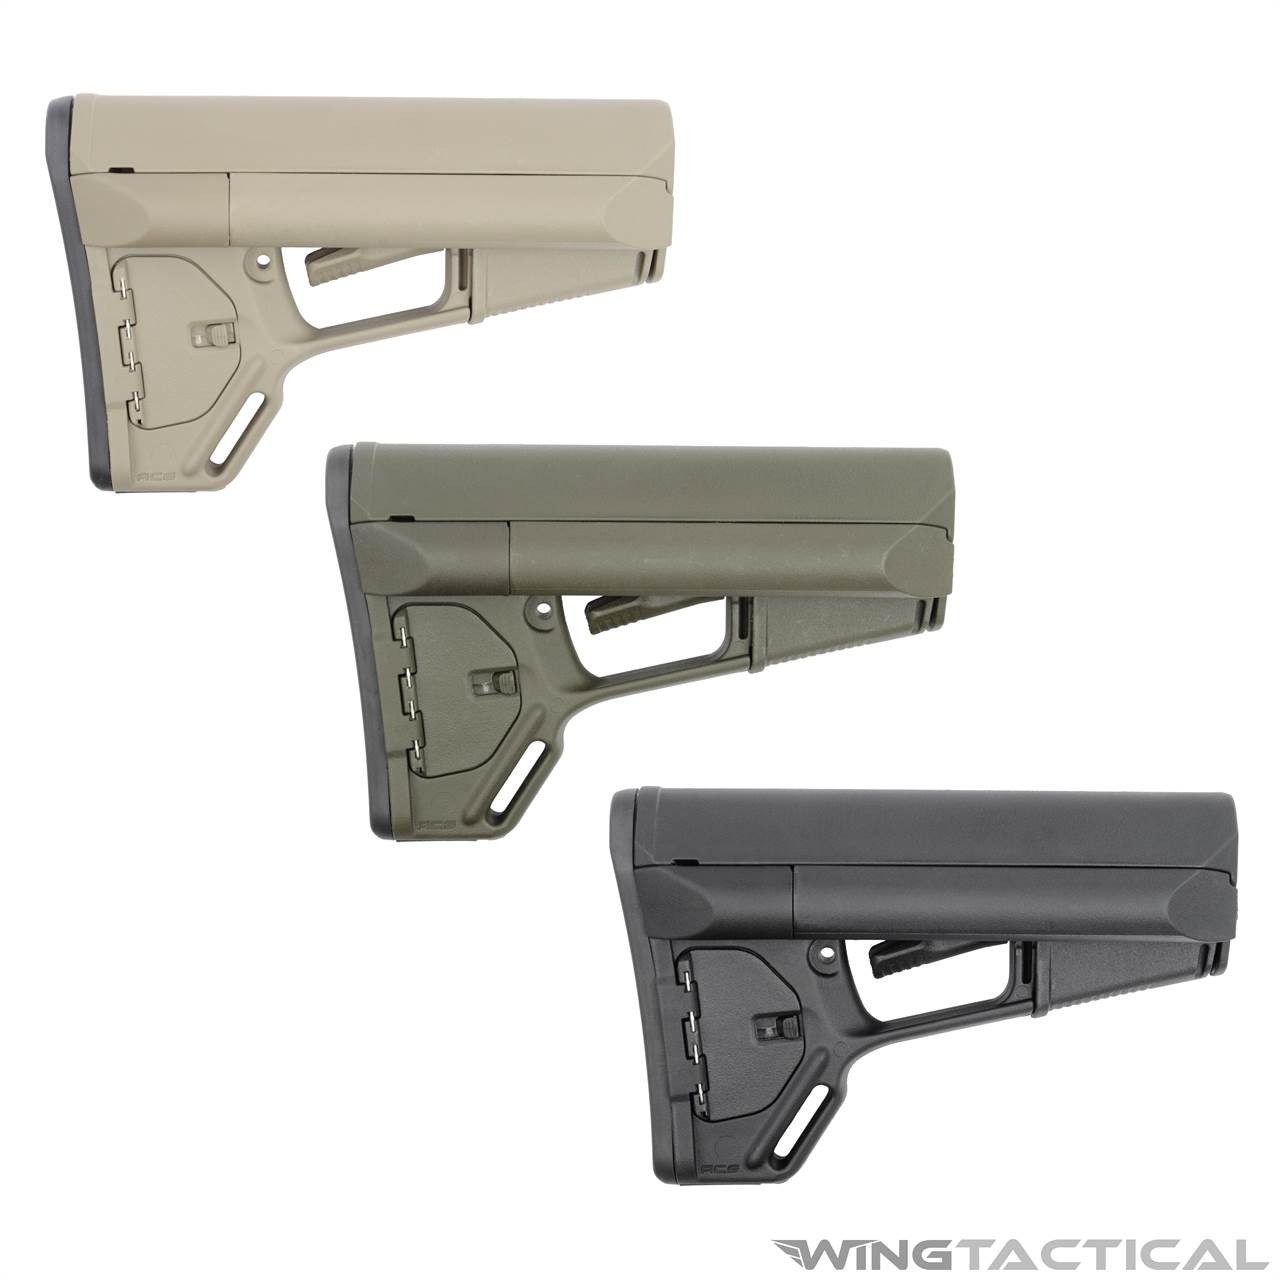 Magpul ACS Stock | Adaptable Carbine Stock - MAG370 | Wing Tactical